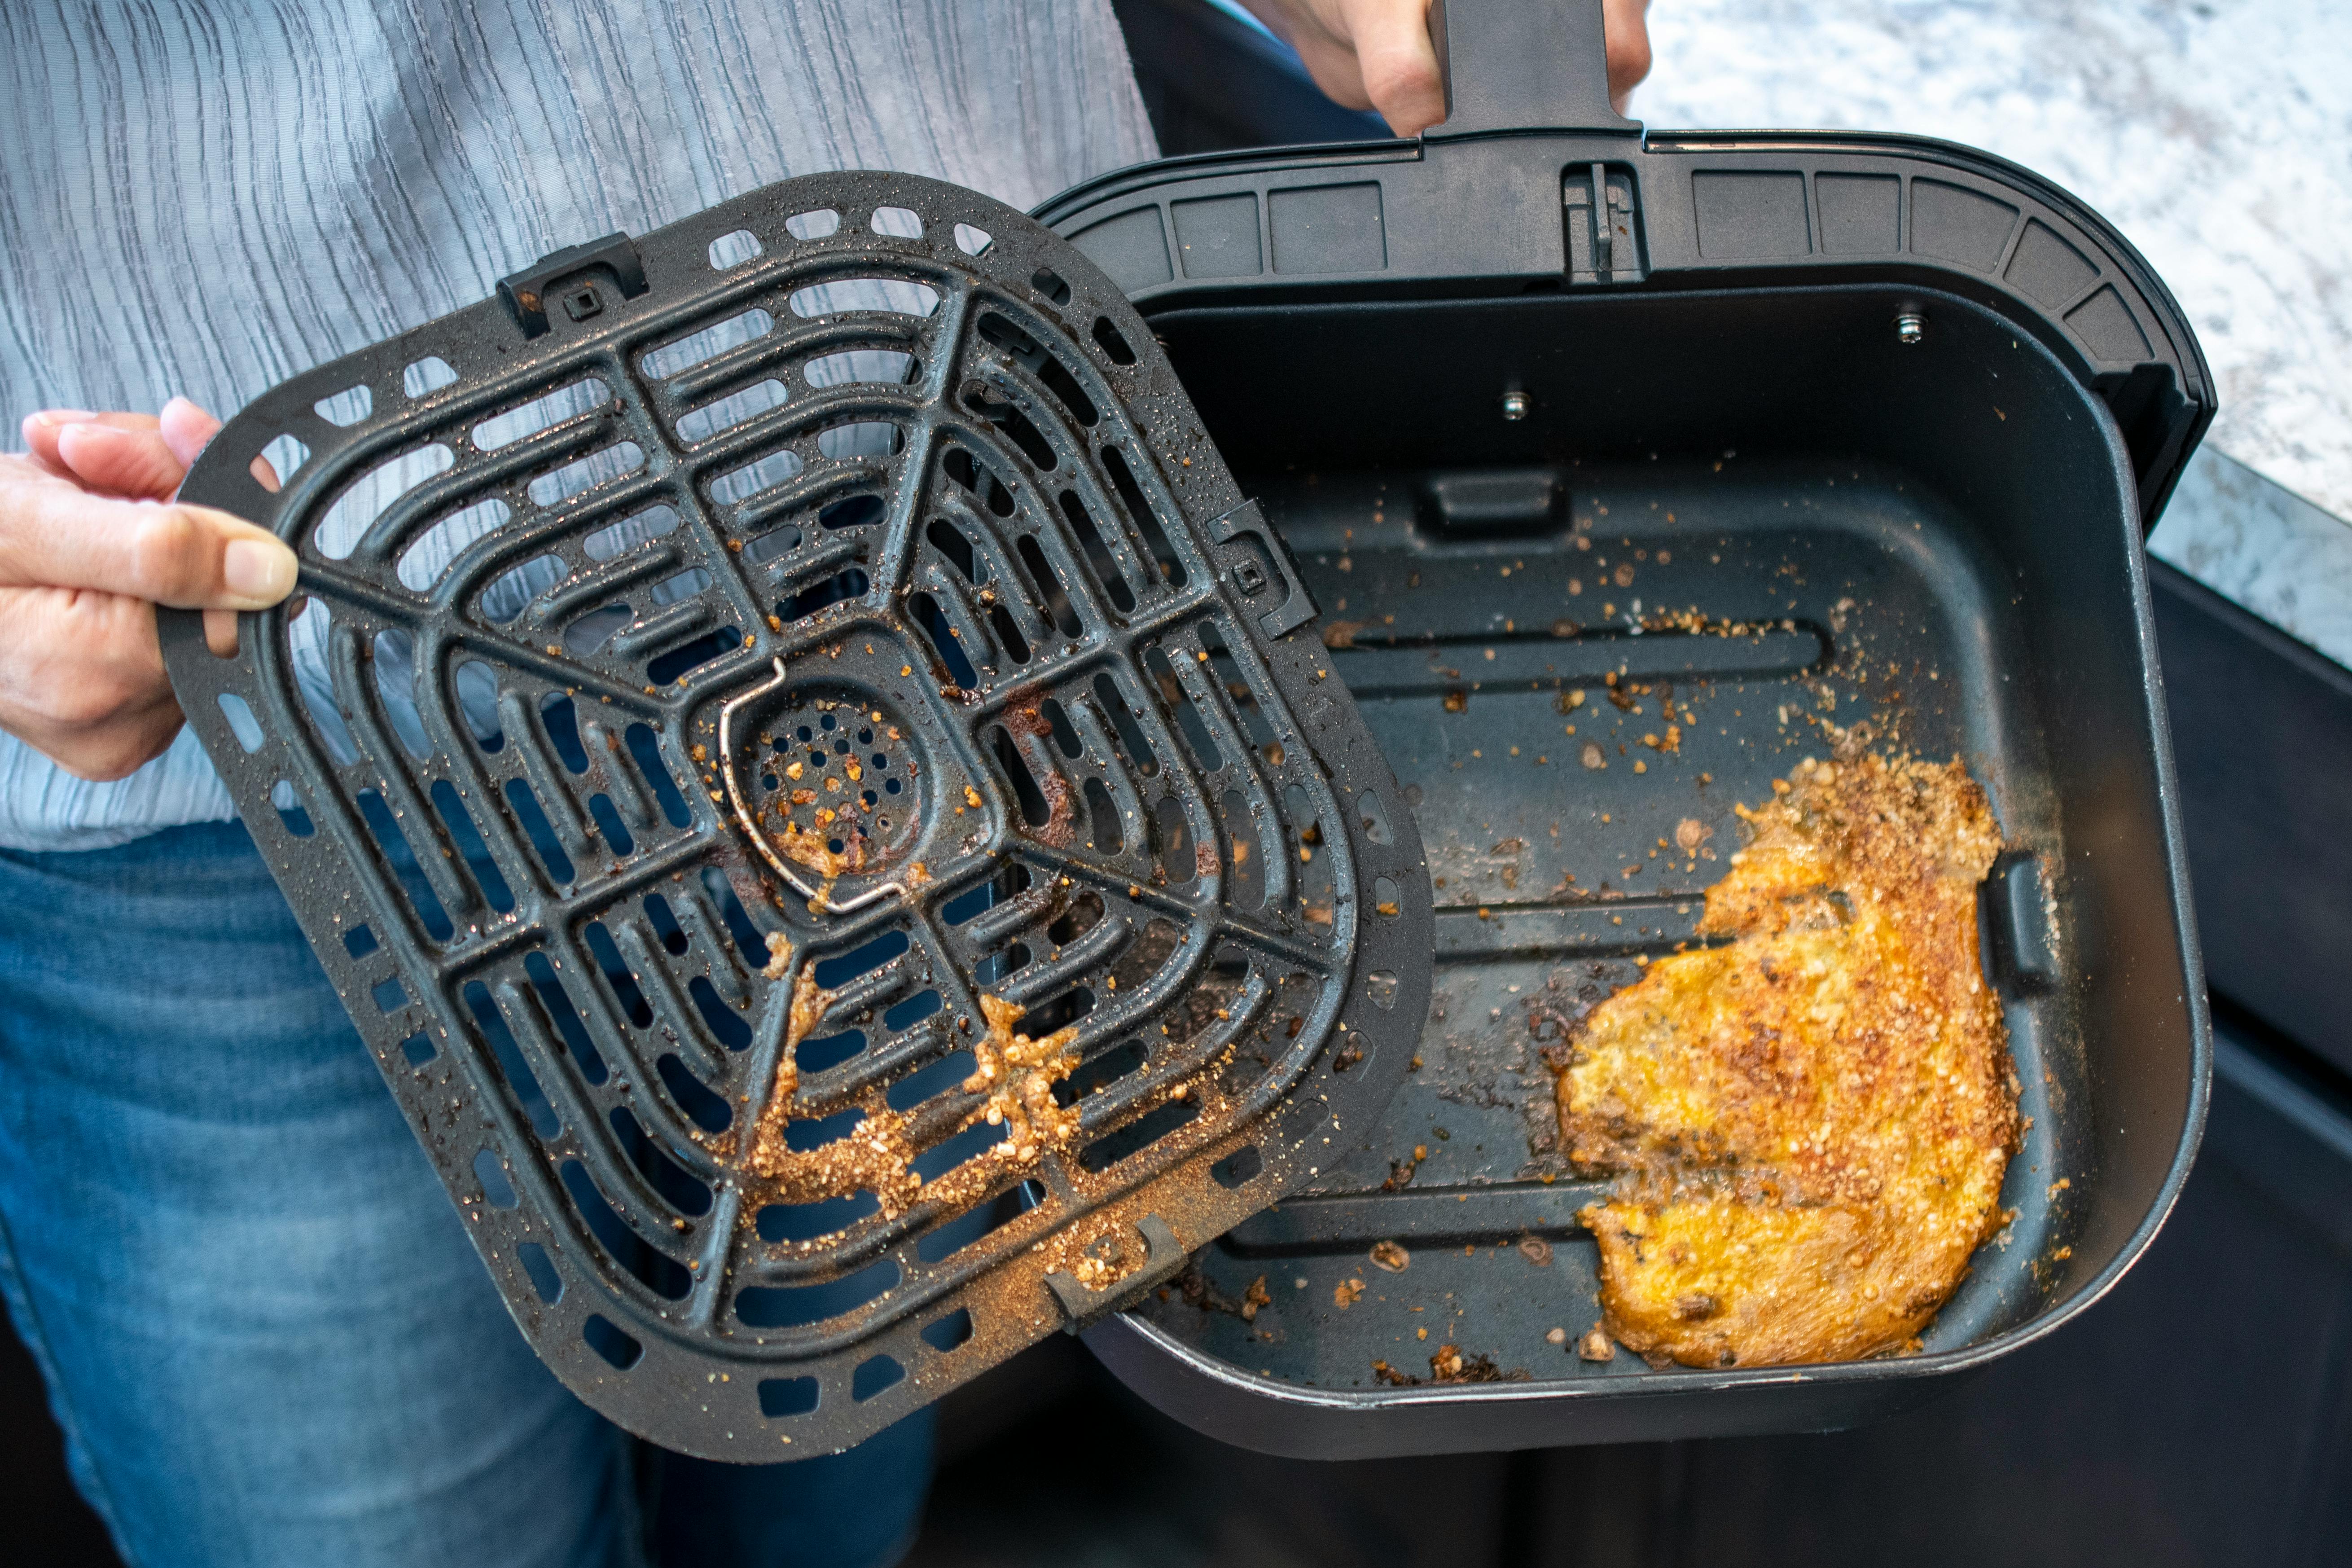 here's how to clean your air fryer basket the easy way. #AirFryer